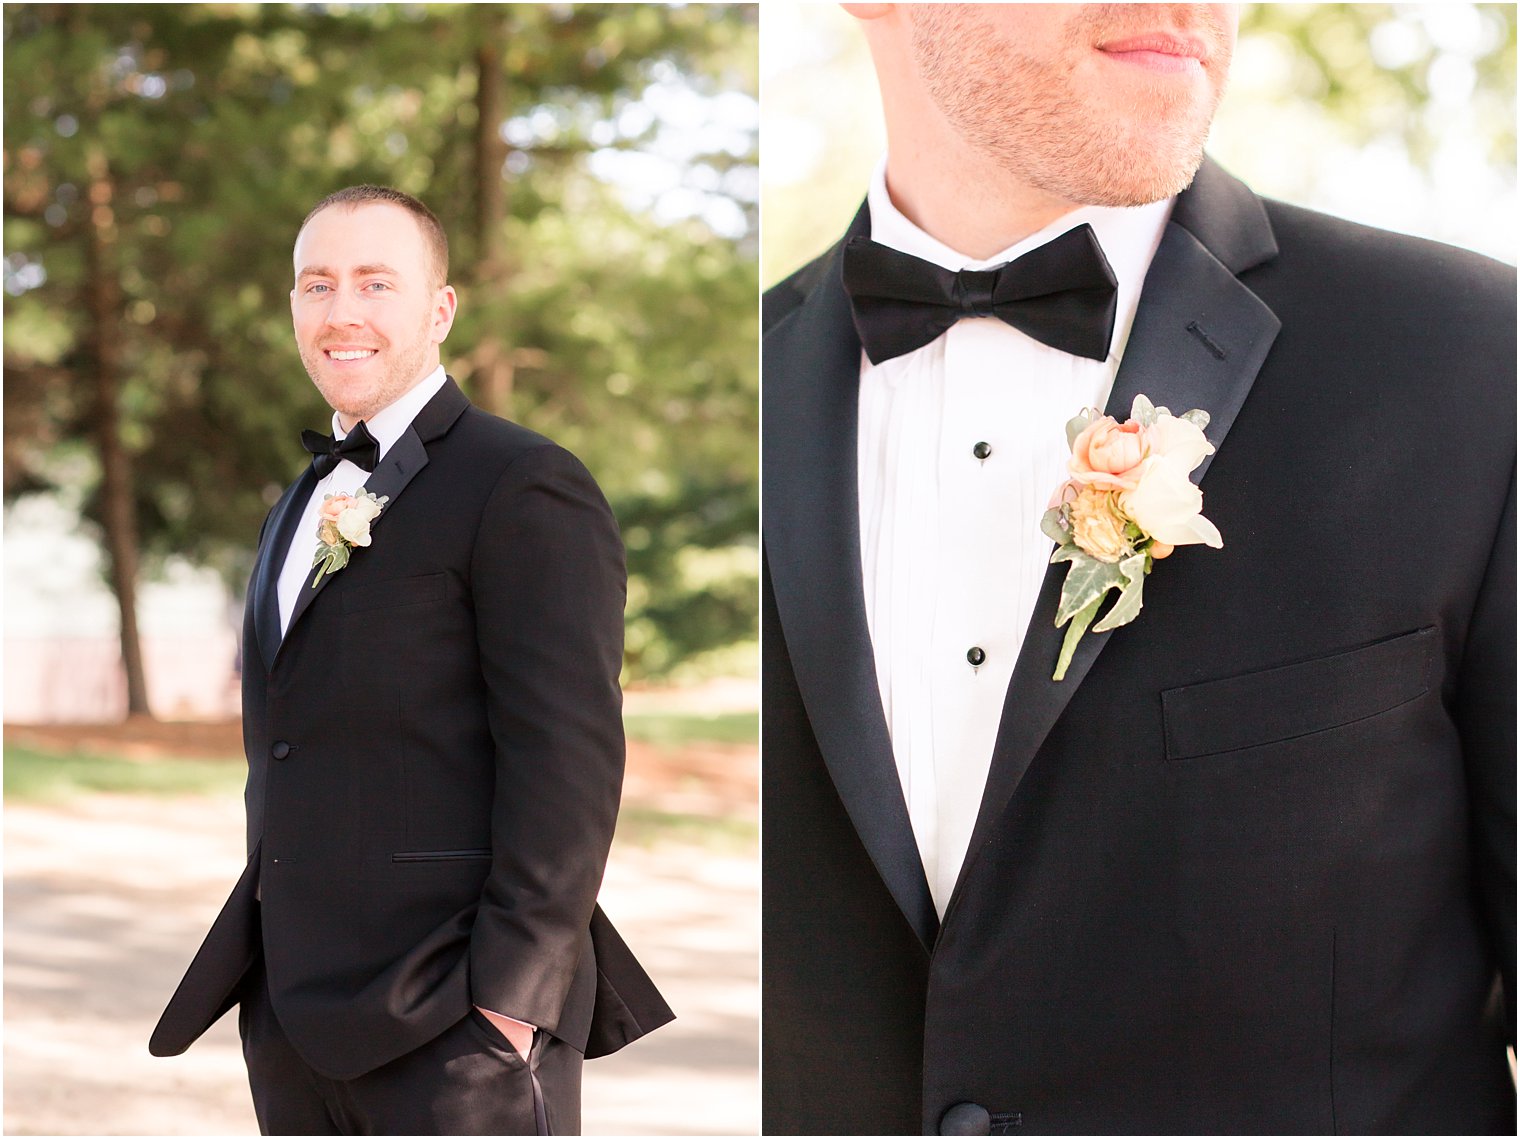 Boutonniere by Laurelwood Designs | Laurie Luttrell